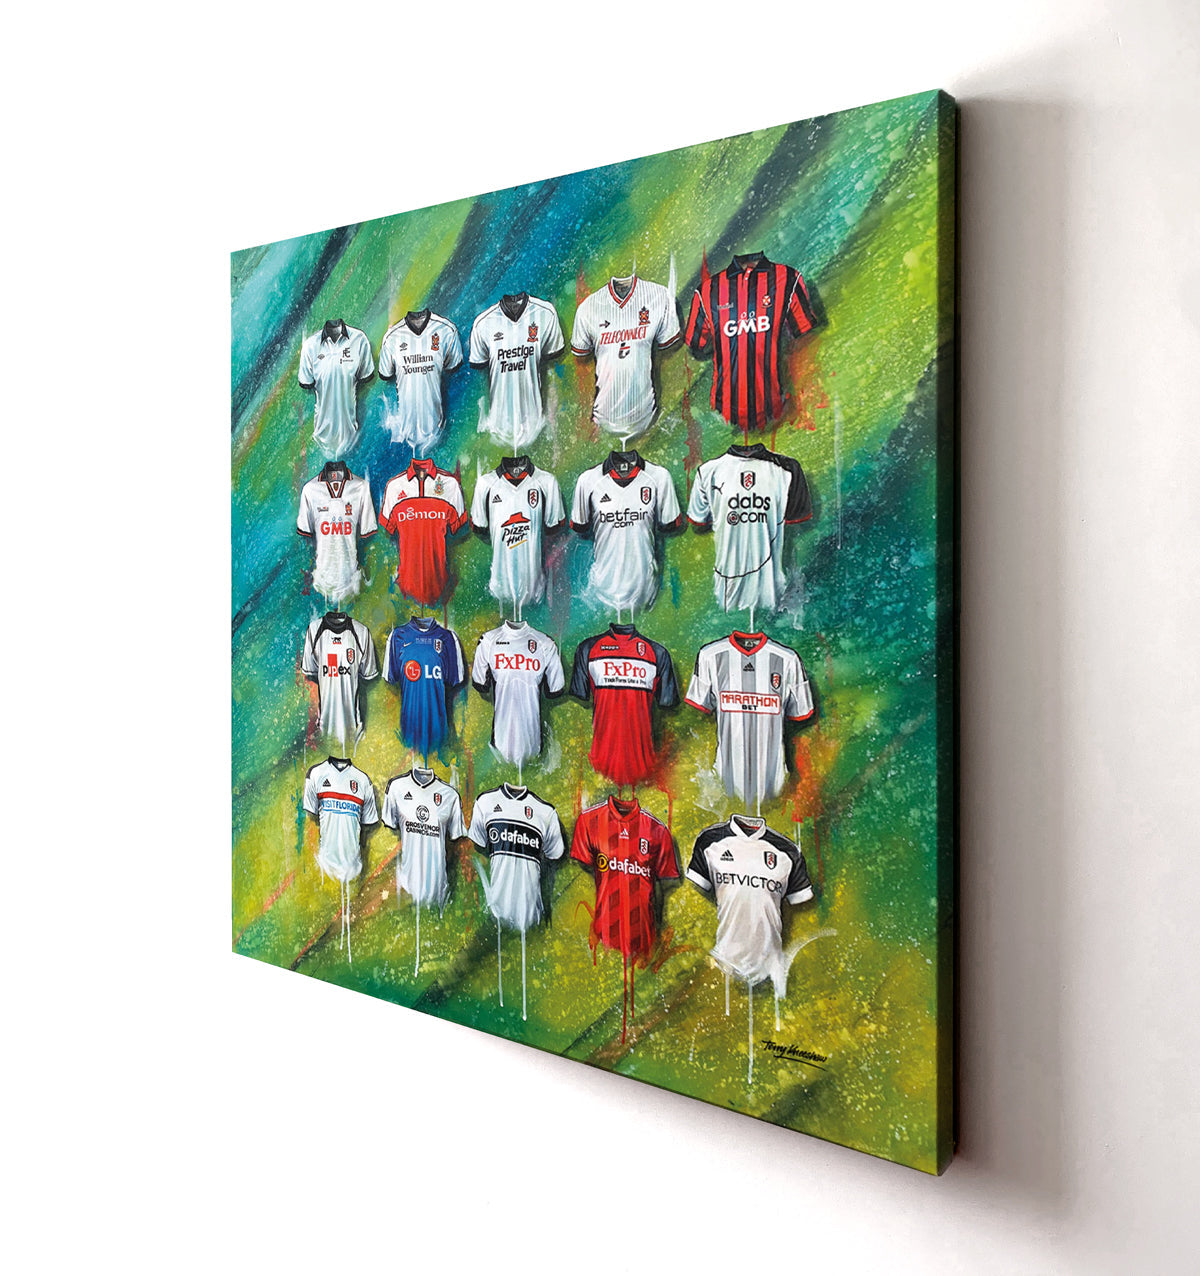 Terry Kneeshaw offers various sized canvas artwork of the Fulham team in his collection. The canvases are available in three sizes: 20x20, 30x30, and 40x40, with the option of framed or unframed black floating frame. The Fulham canvases showcase the team in action, with vivid colors and excellent detailing. They are perfect for die-hard fans looking to add a touch of their favorite team to their home or office decor.